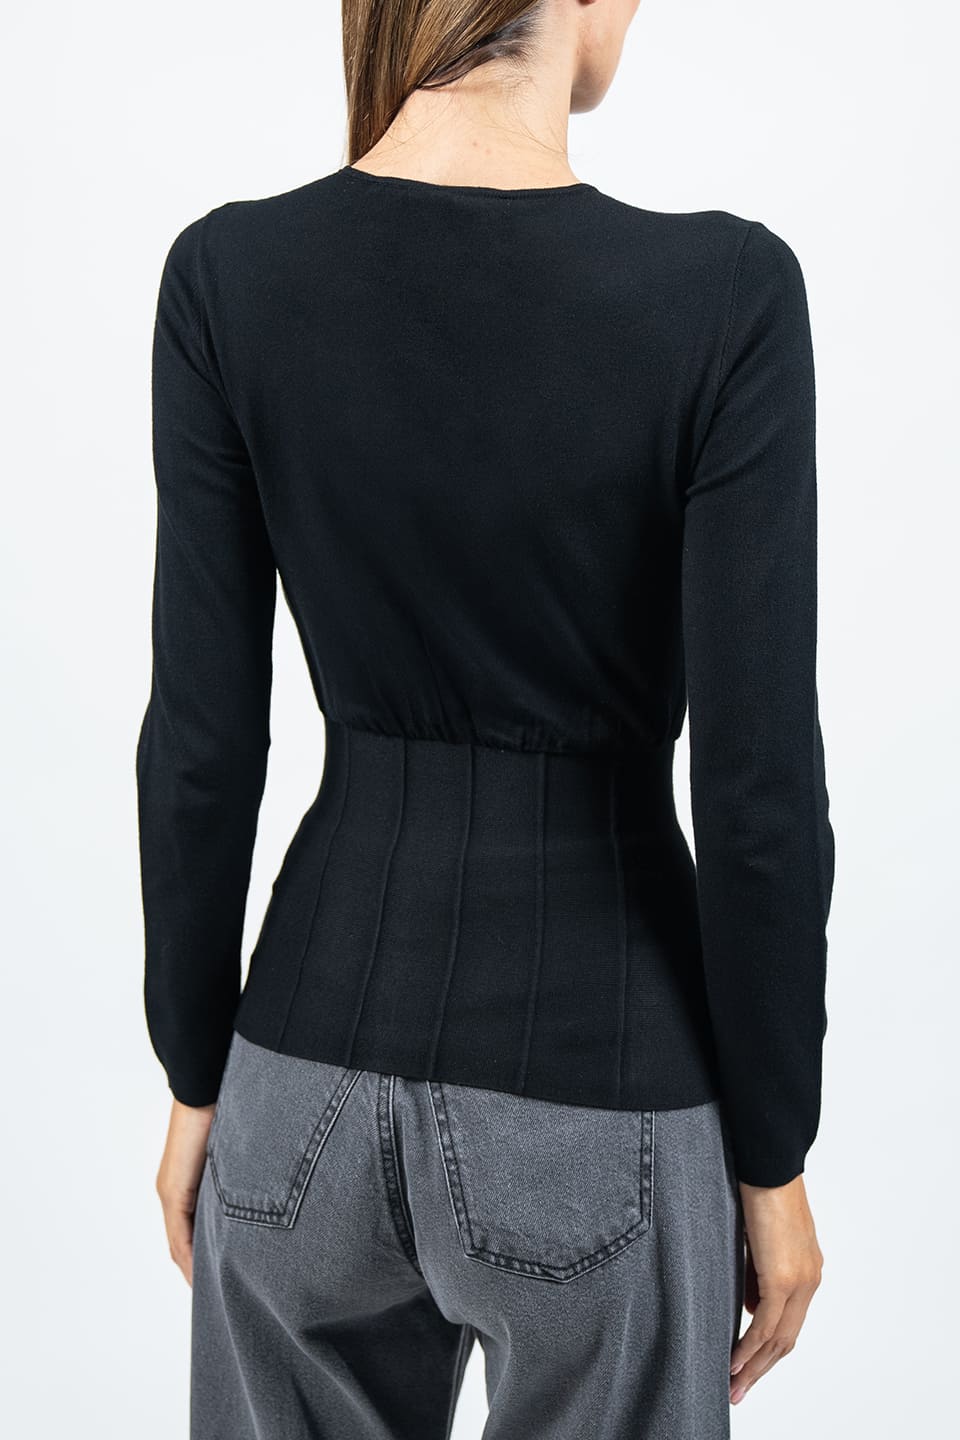 Designer Black Women long sleeve, shop online with free delivery in UAE. Product gallery 5